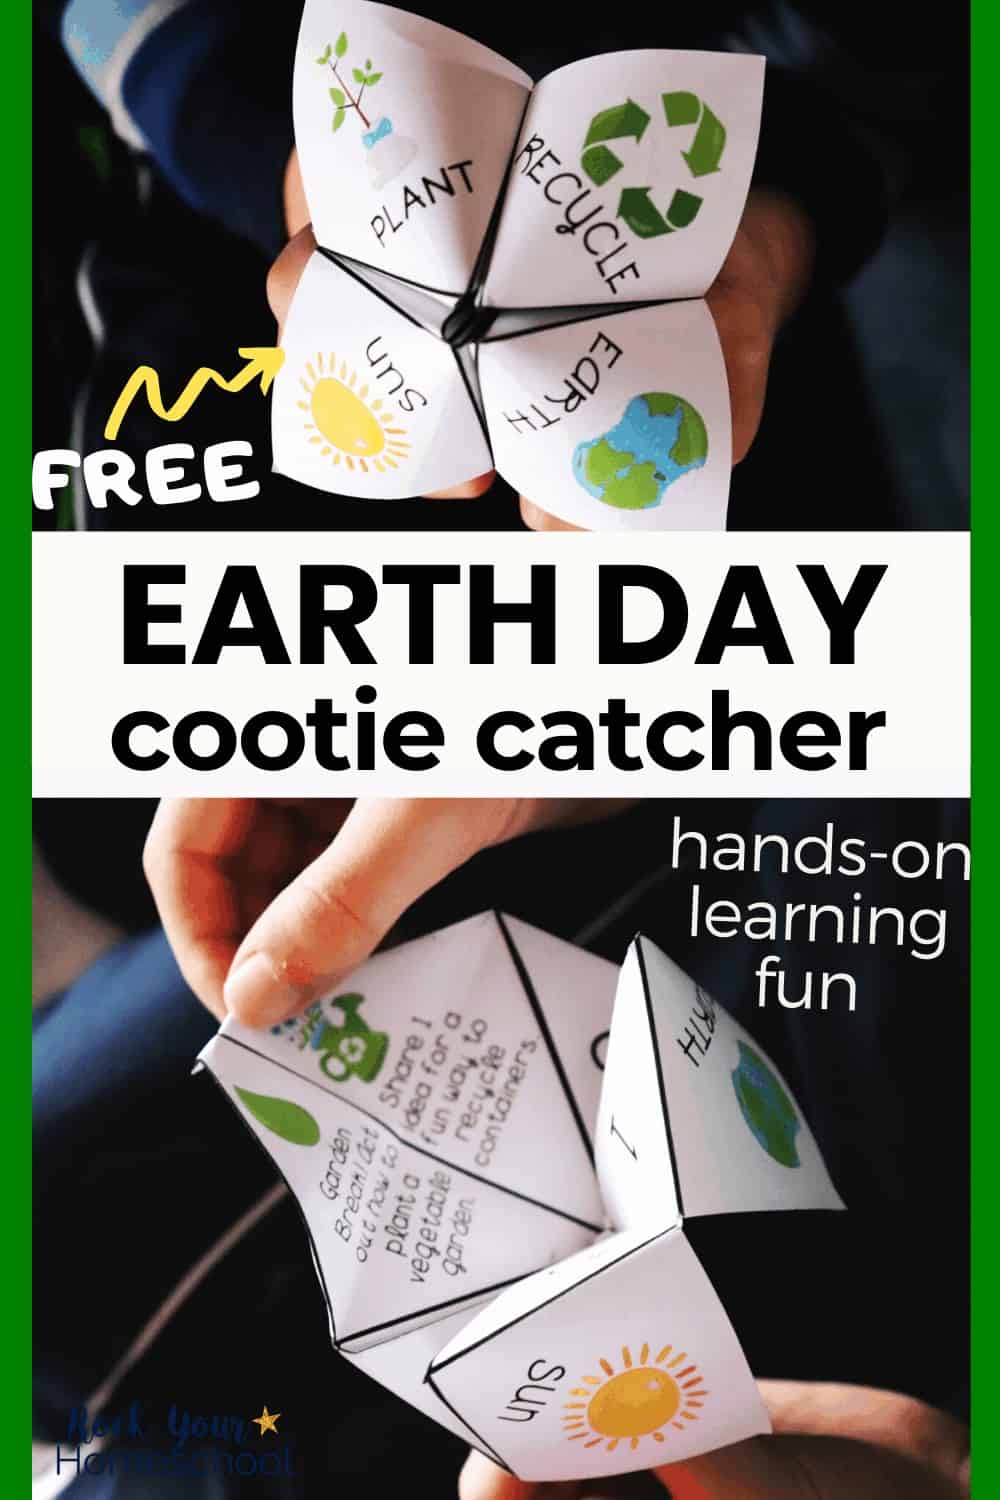 Awesome Earth Day Activity for Kids with Free Cootie Catcher